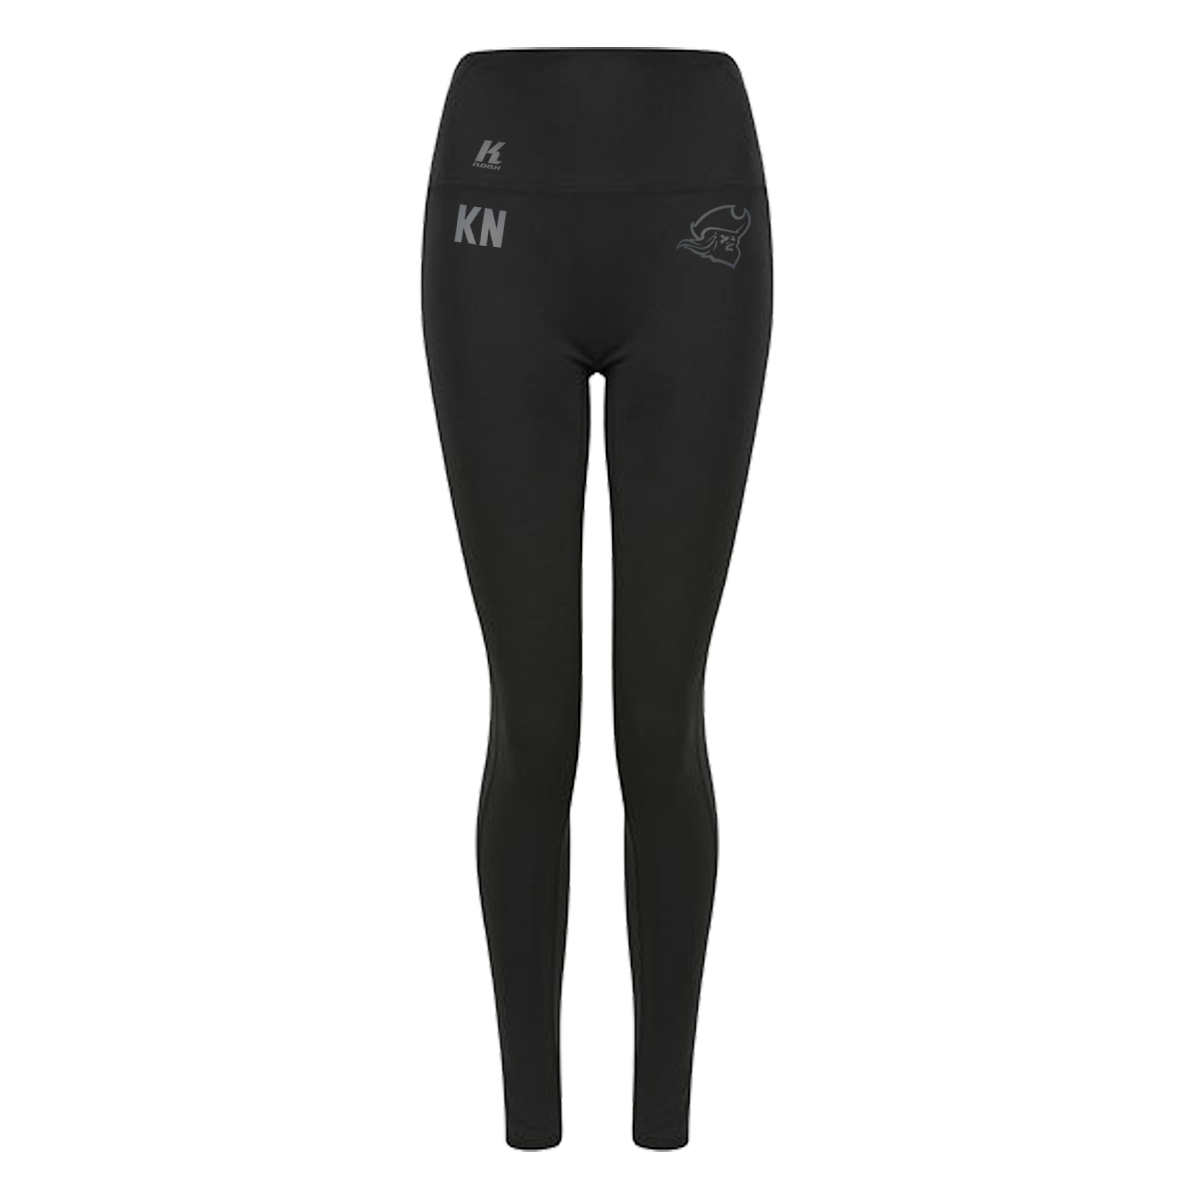 Fighting Pirates "Blackline" Womens Core Pocket Legging TL370 with Initials/Playernumber